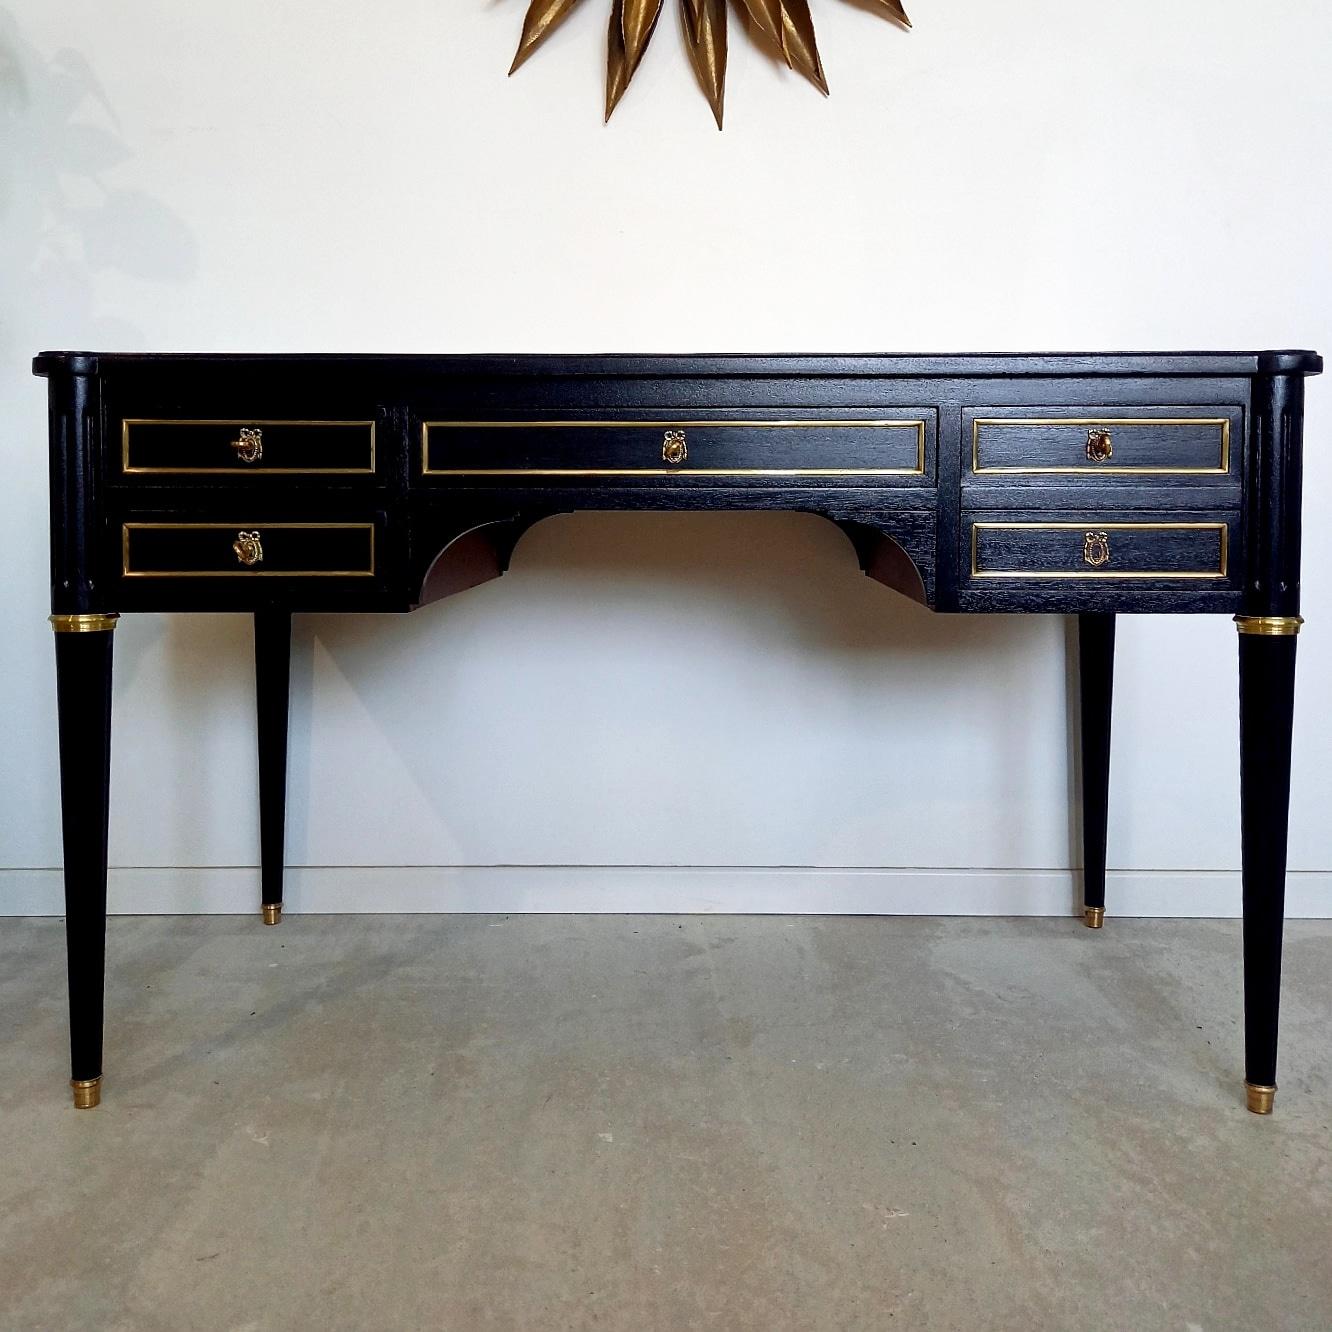 Antique Louis XVI style desk with cognac leather top and gold embossed frieze.
The front of the piece has four dovetail drawers with brass details. The right double drawer is actually a single deep drawer with a secret hiding place in the double